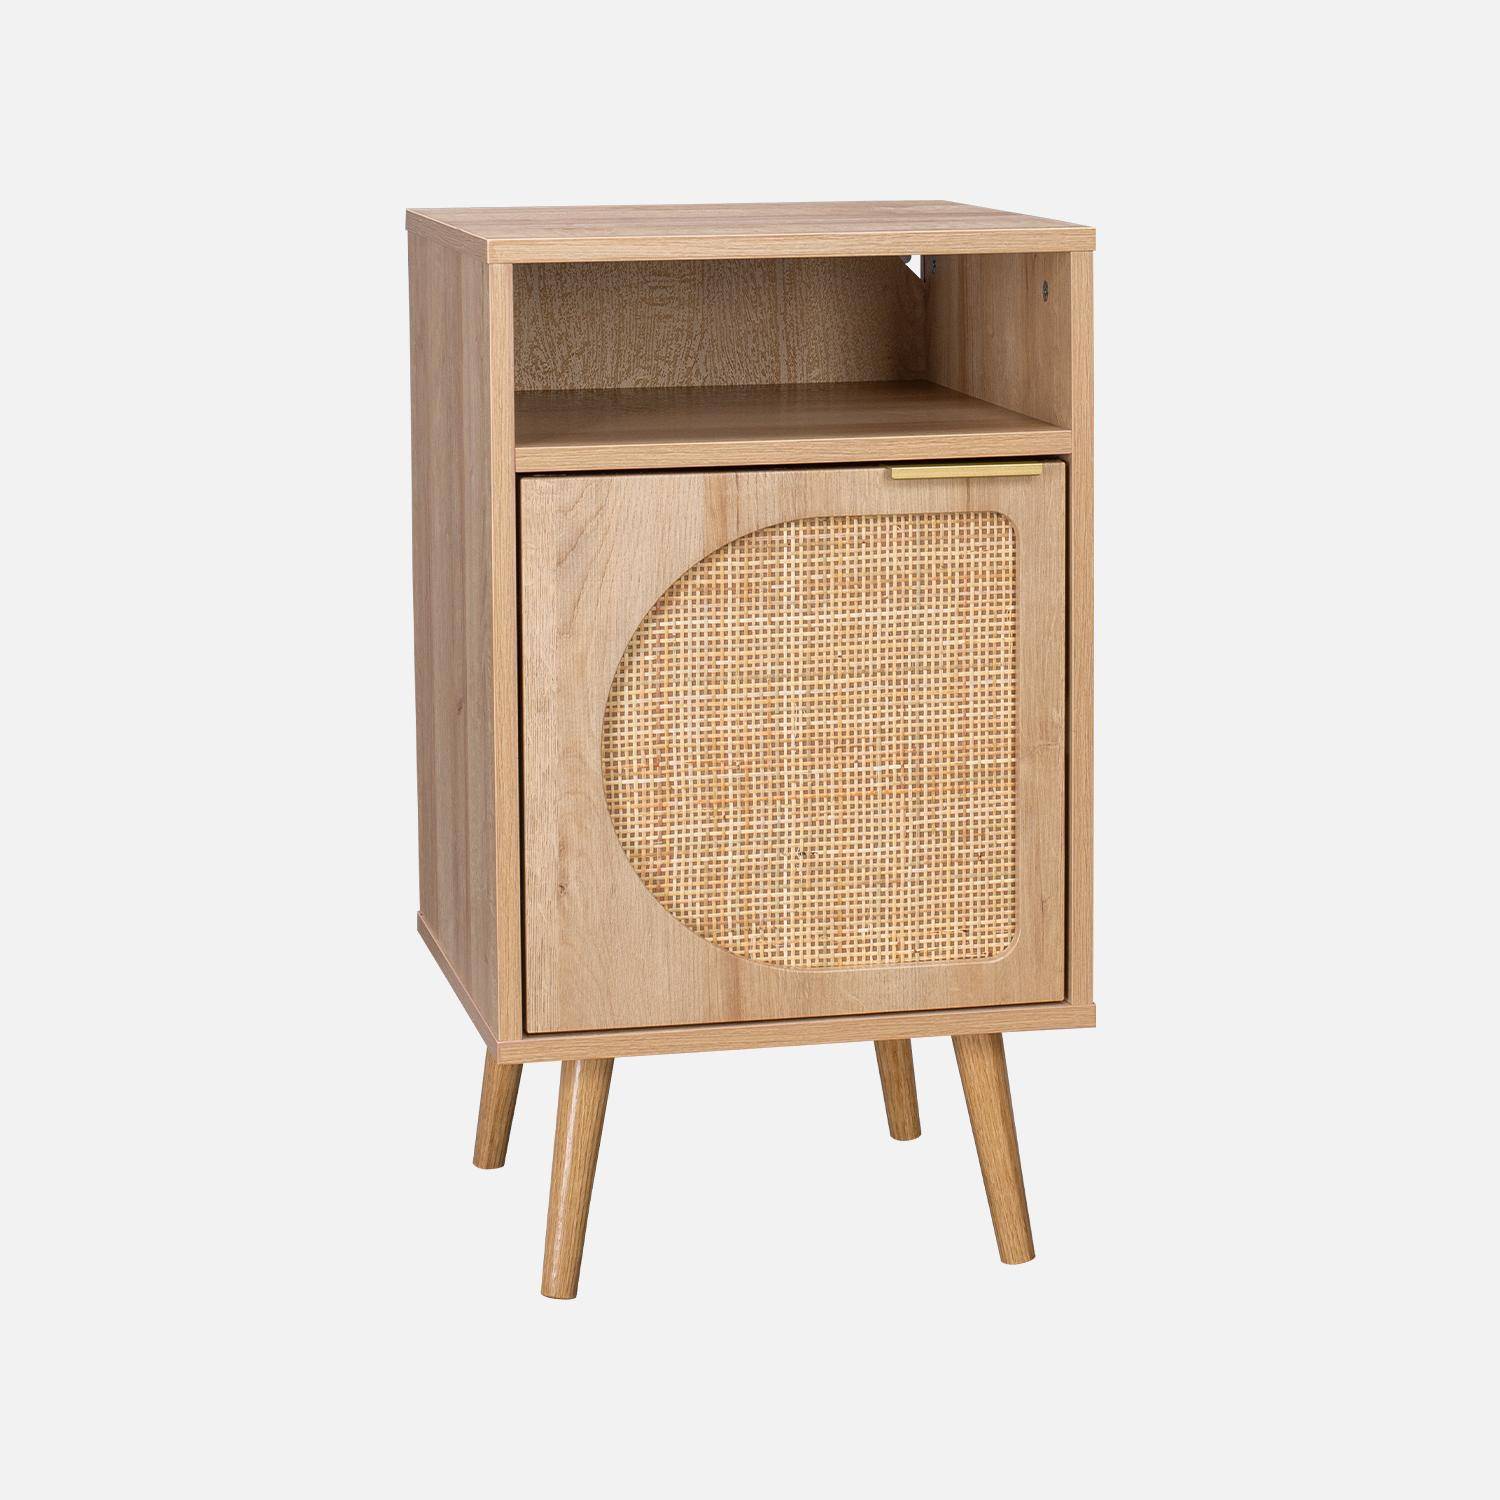 Wood and rounded cane rattan bedside table, 40x39x65.8cm, Eva, 1 cupboard, 1 storage space,sweeek,Photo5